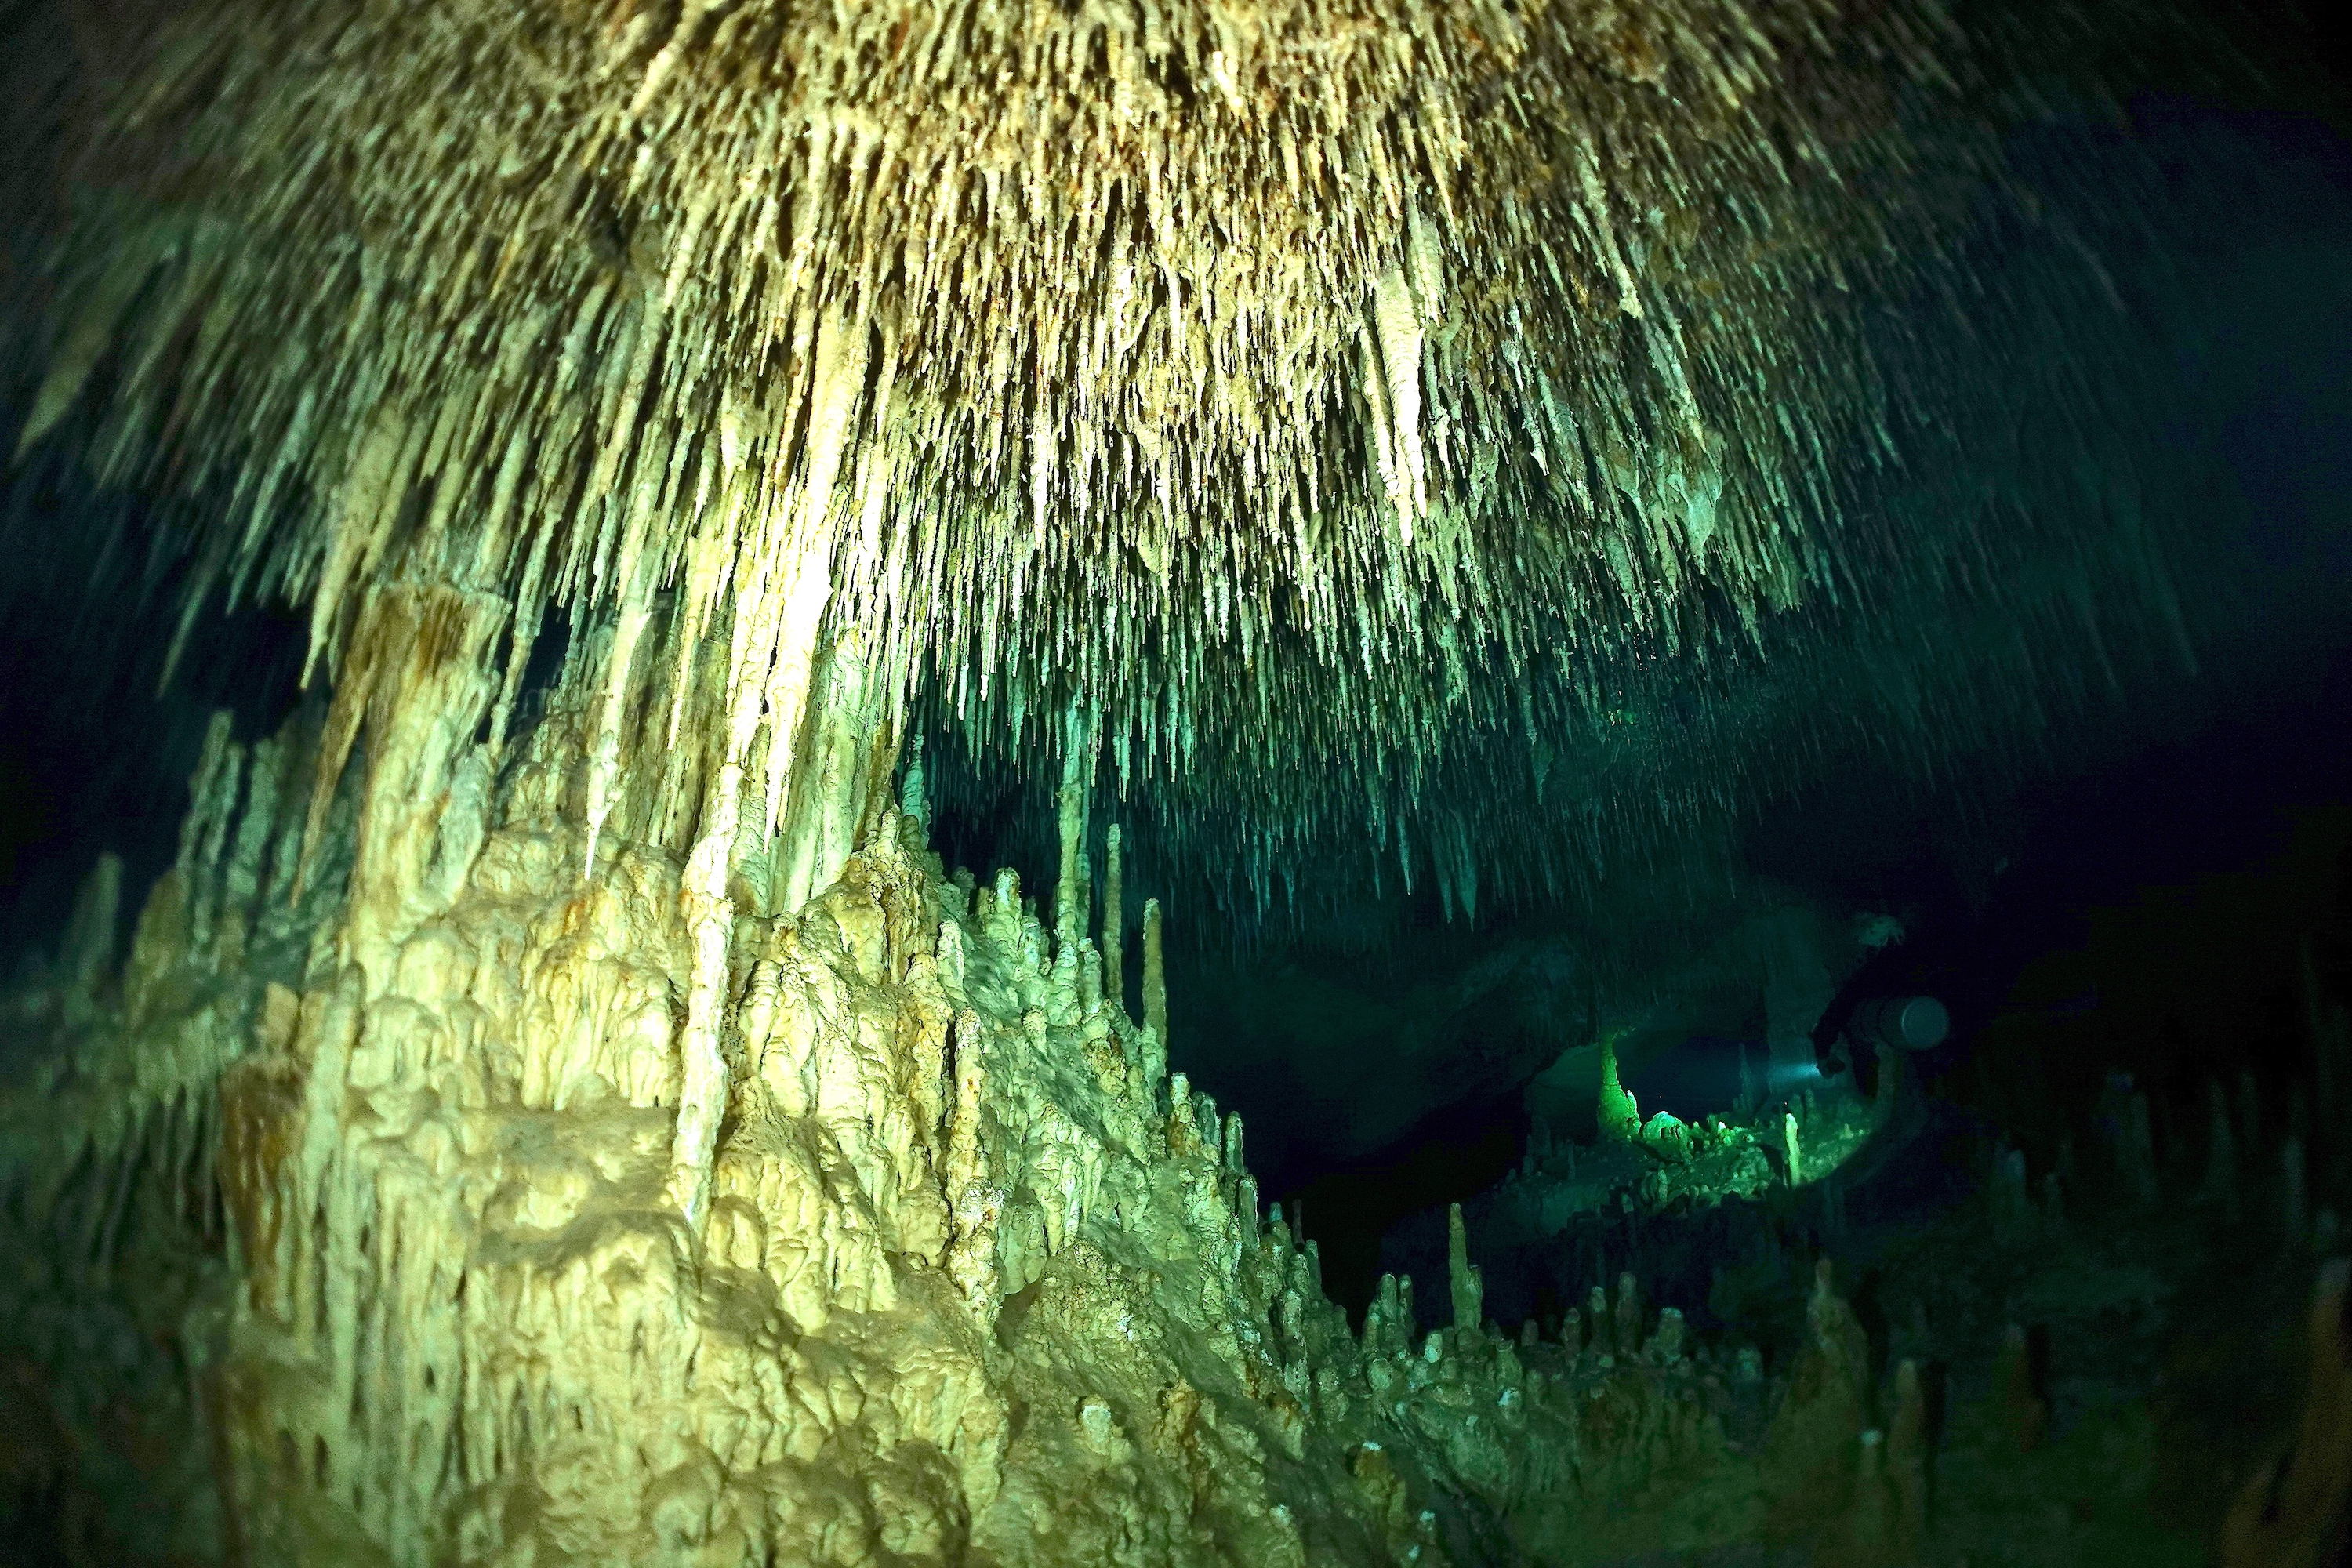 Stalactites descend like fireworks in the tunnel of Cenote Hatztun Aktun. Photo by Pierre Constant